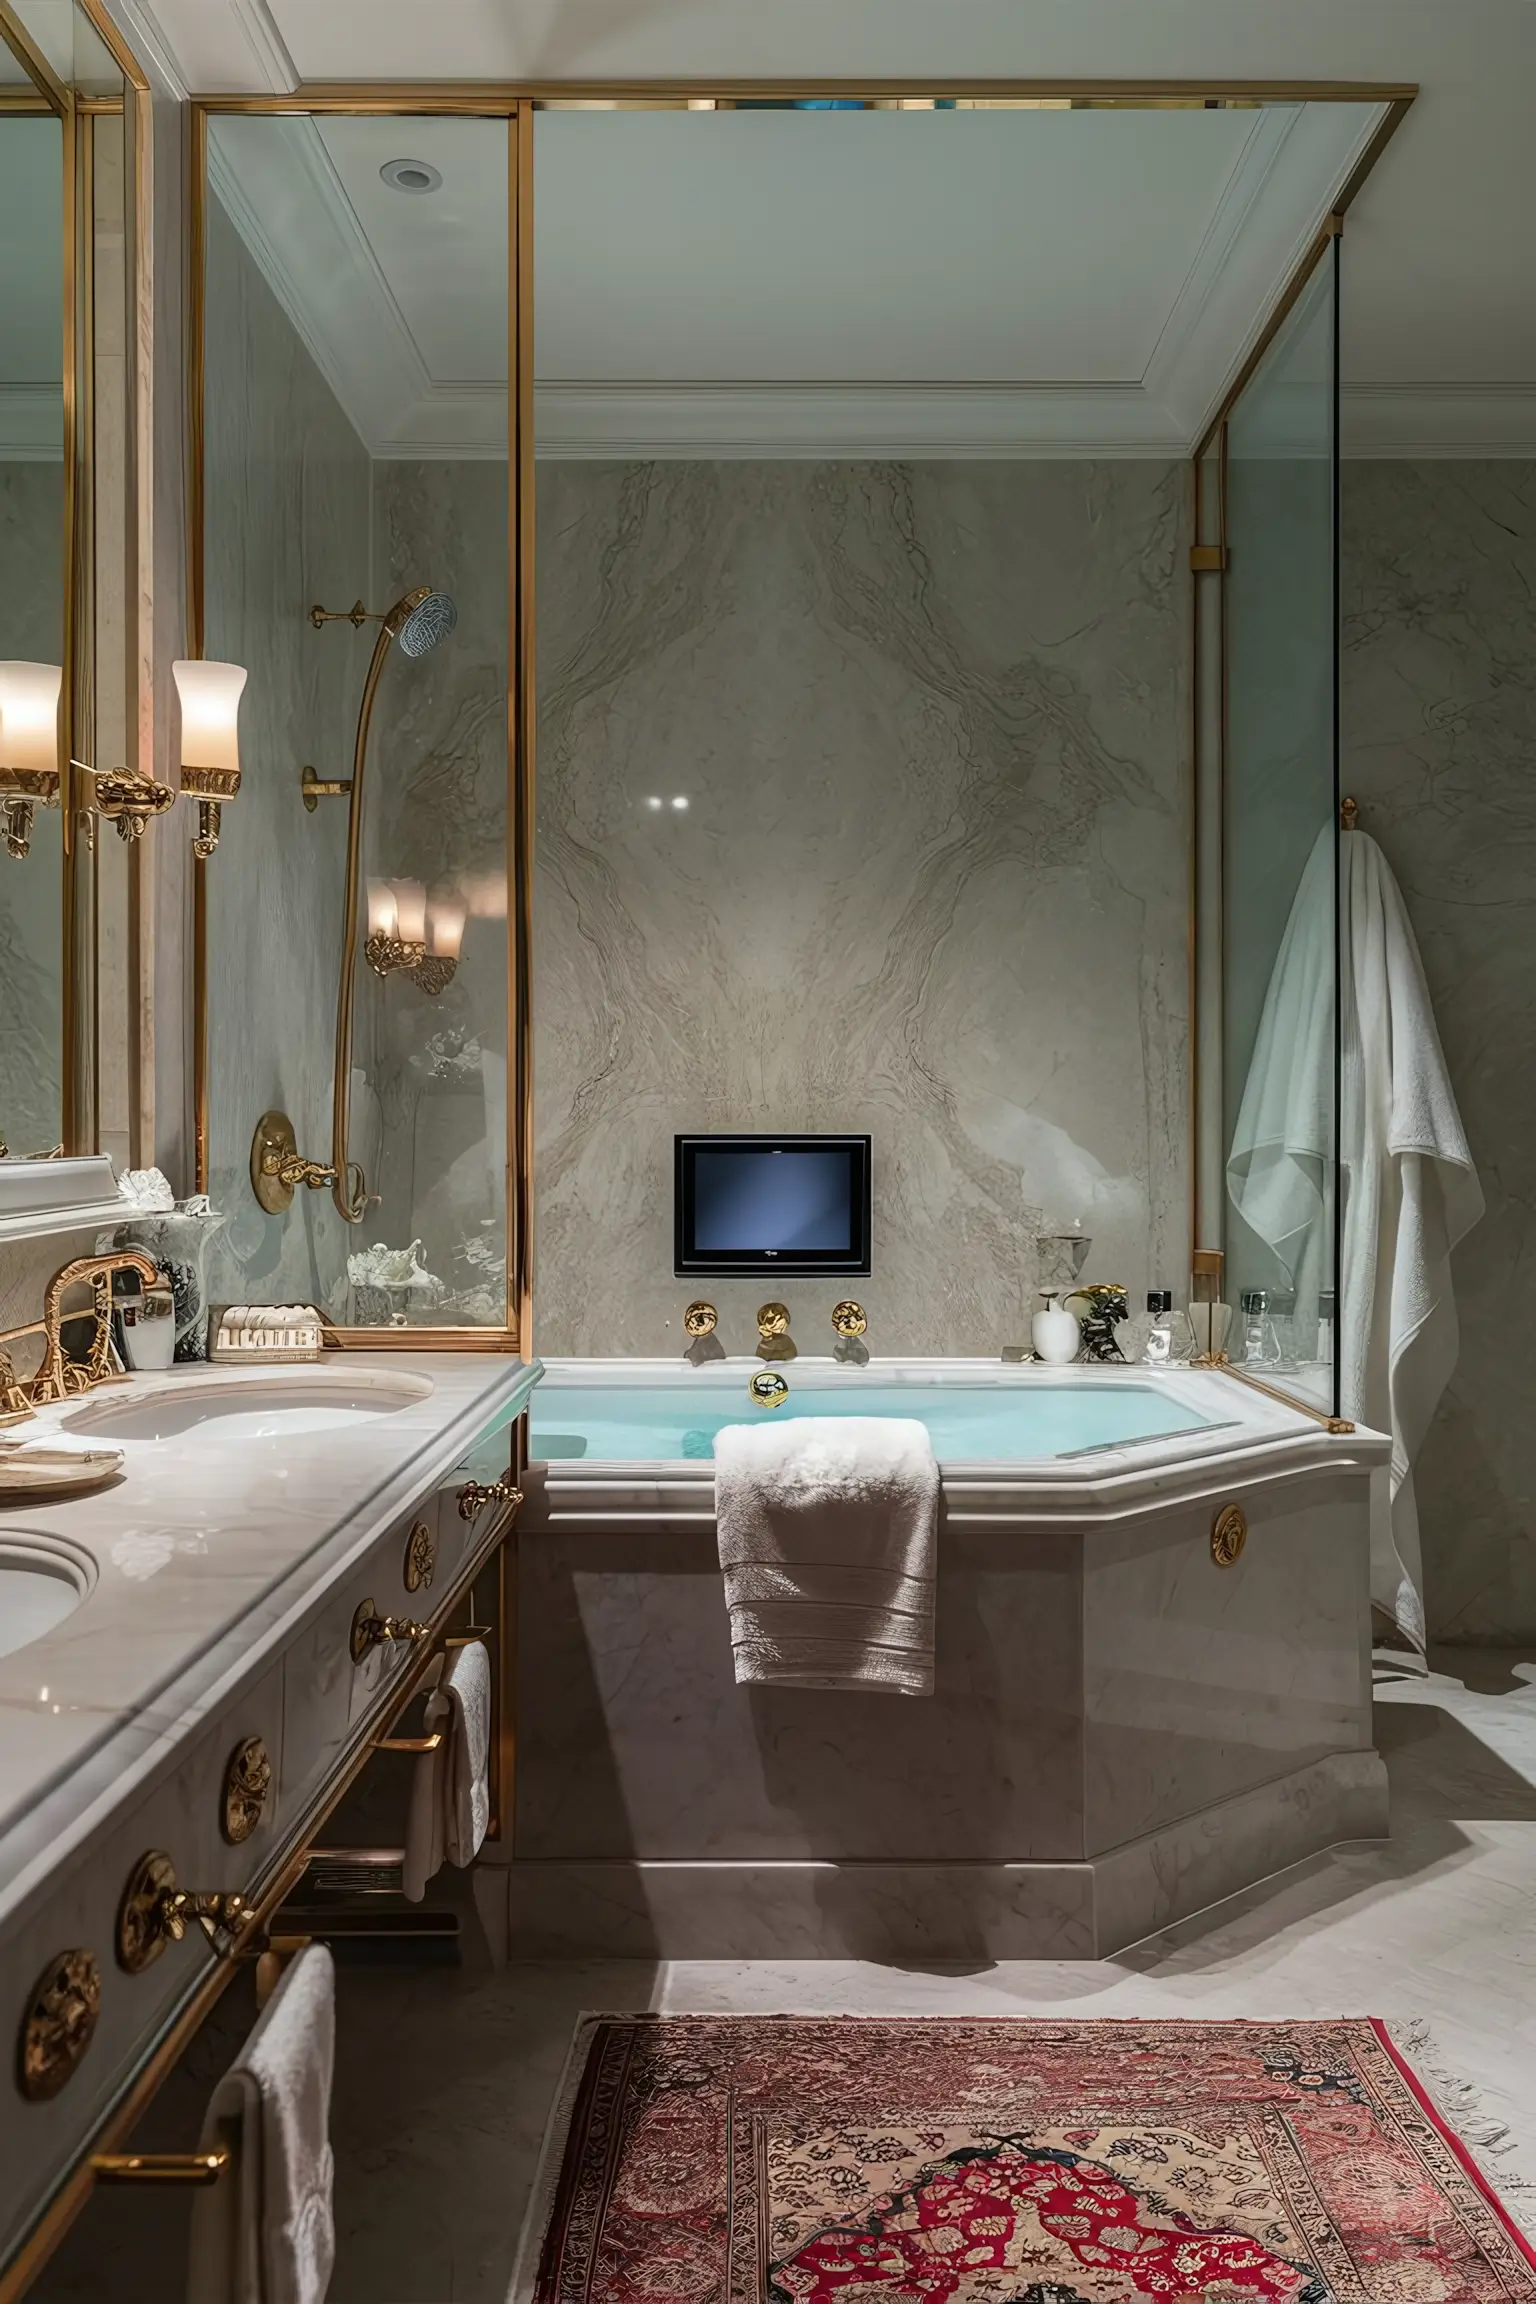 Small luxury bathroom with marble countertops and gold fixtures.